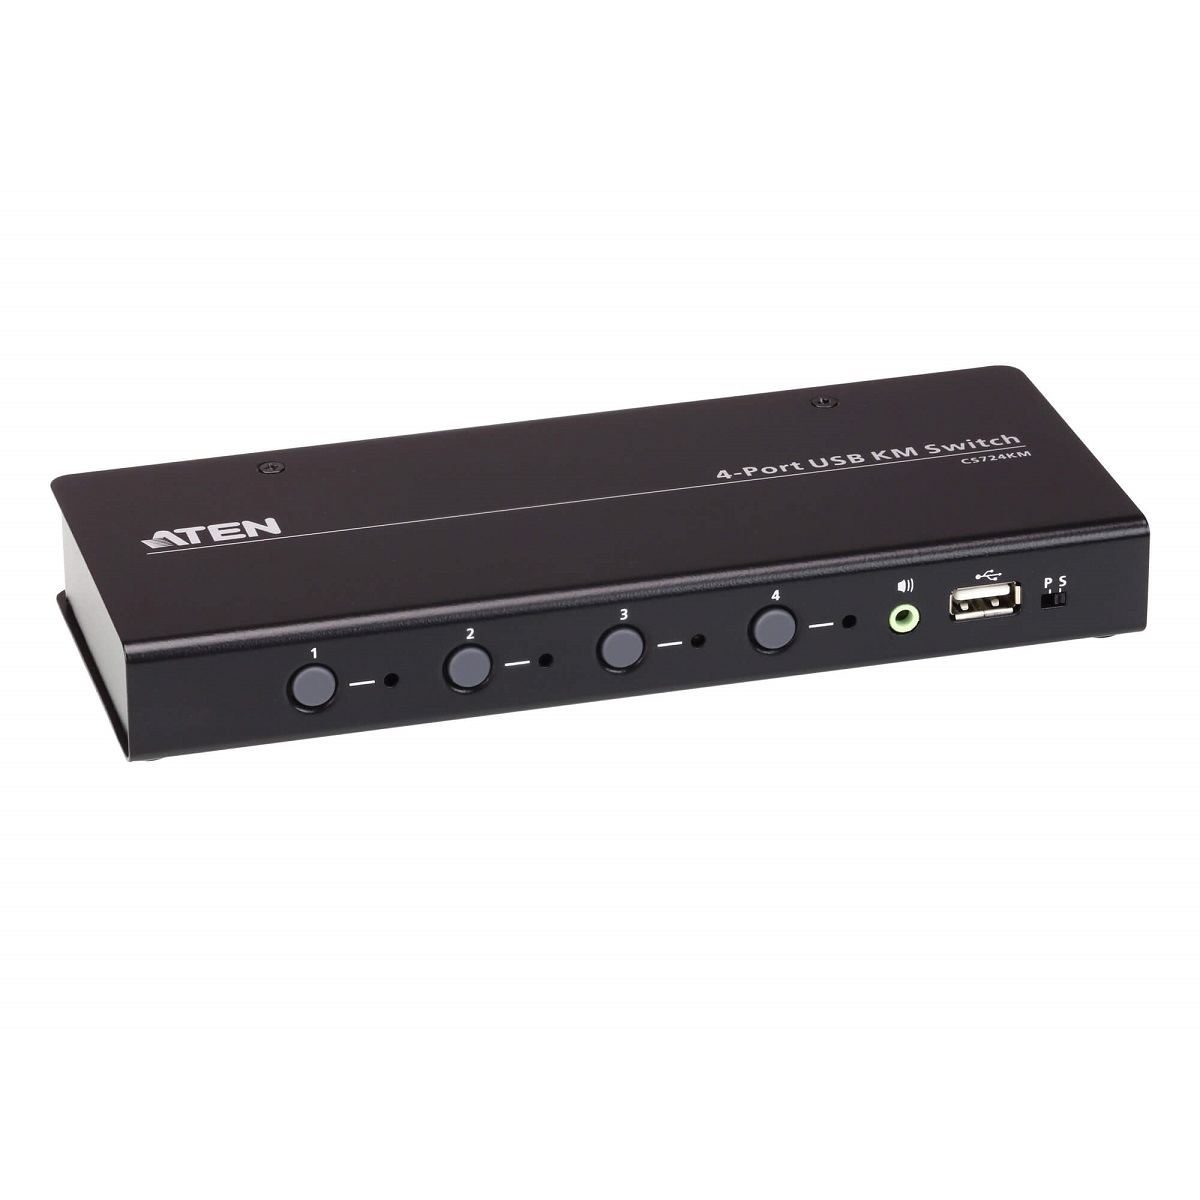 Aten KM Switch 4 Port USB Boundless Switching w/ Audio, Cables Included, Daisy Chain Up to 2 (8 Computers Total)